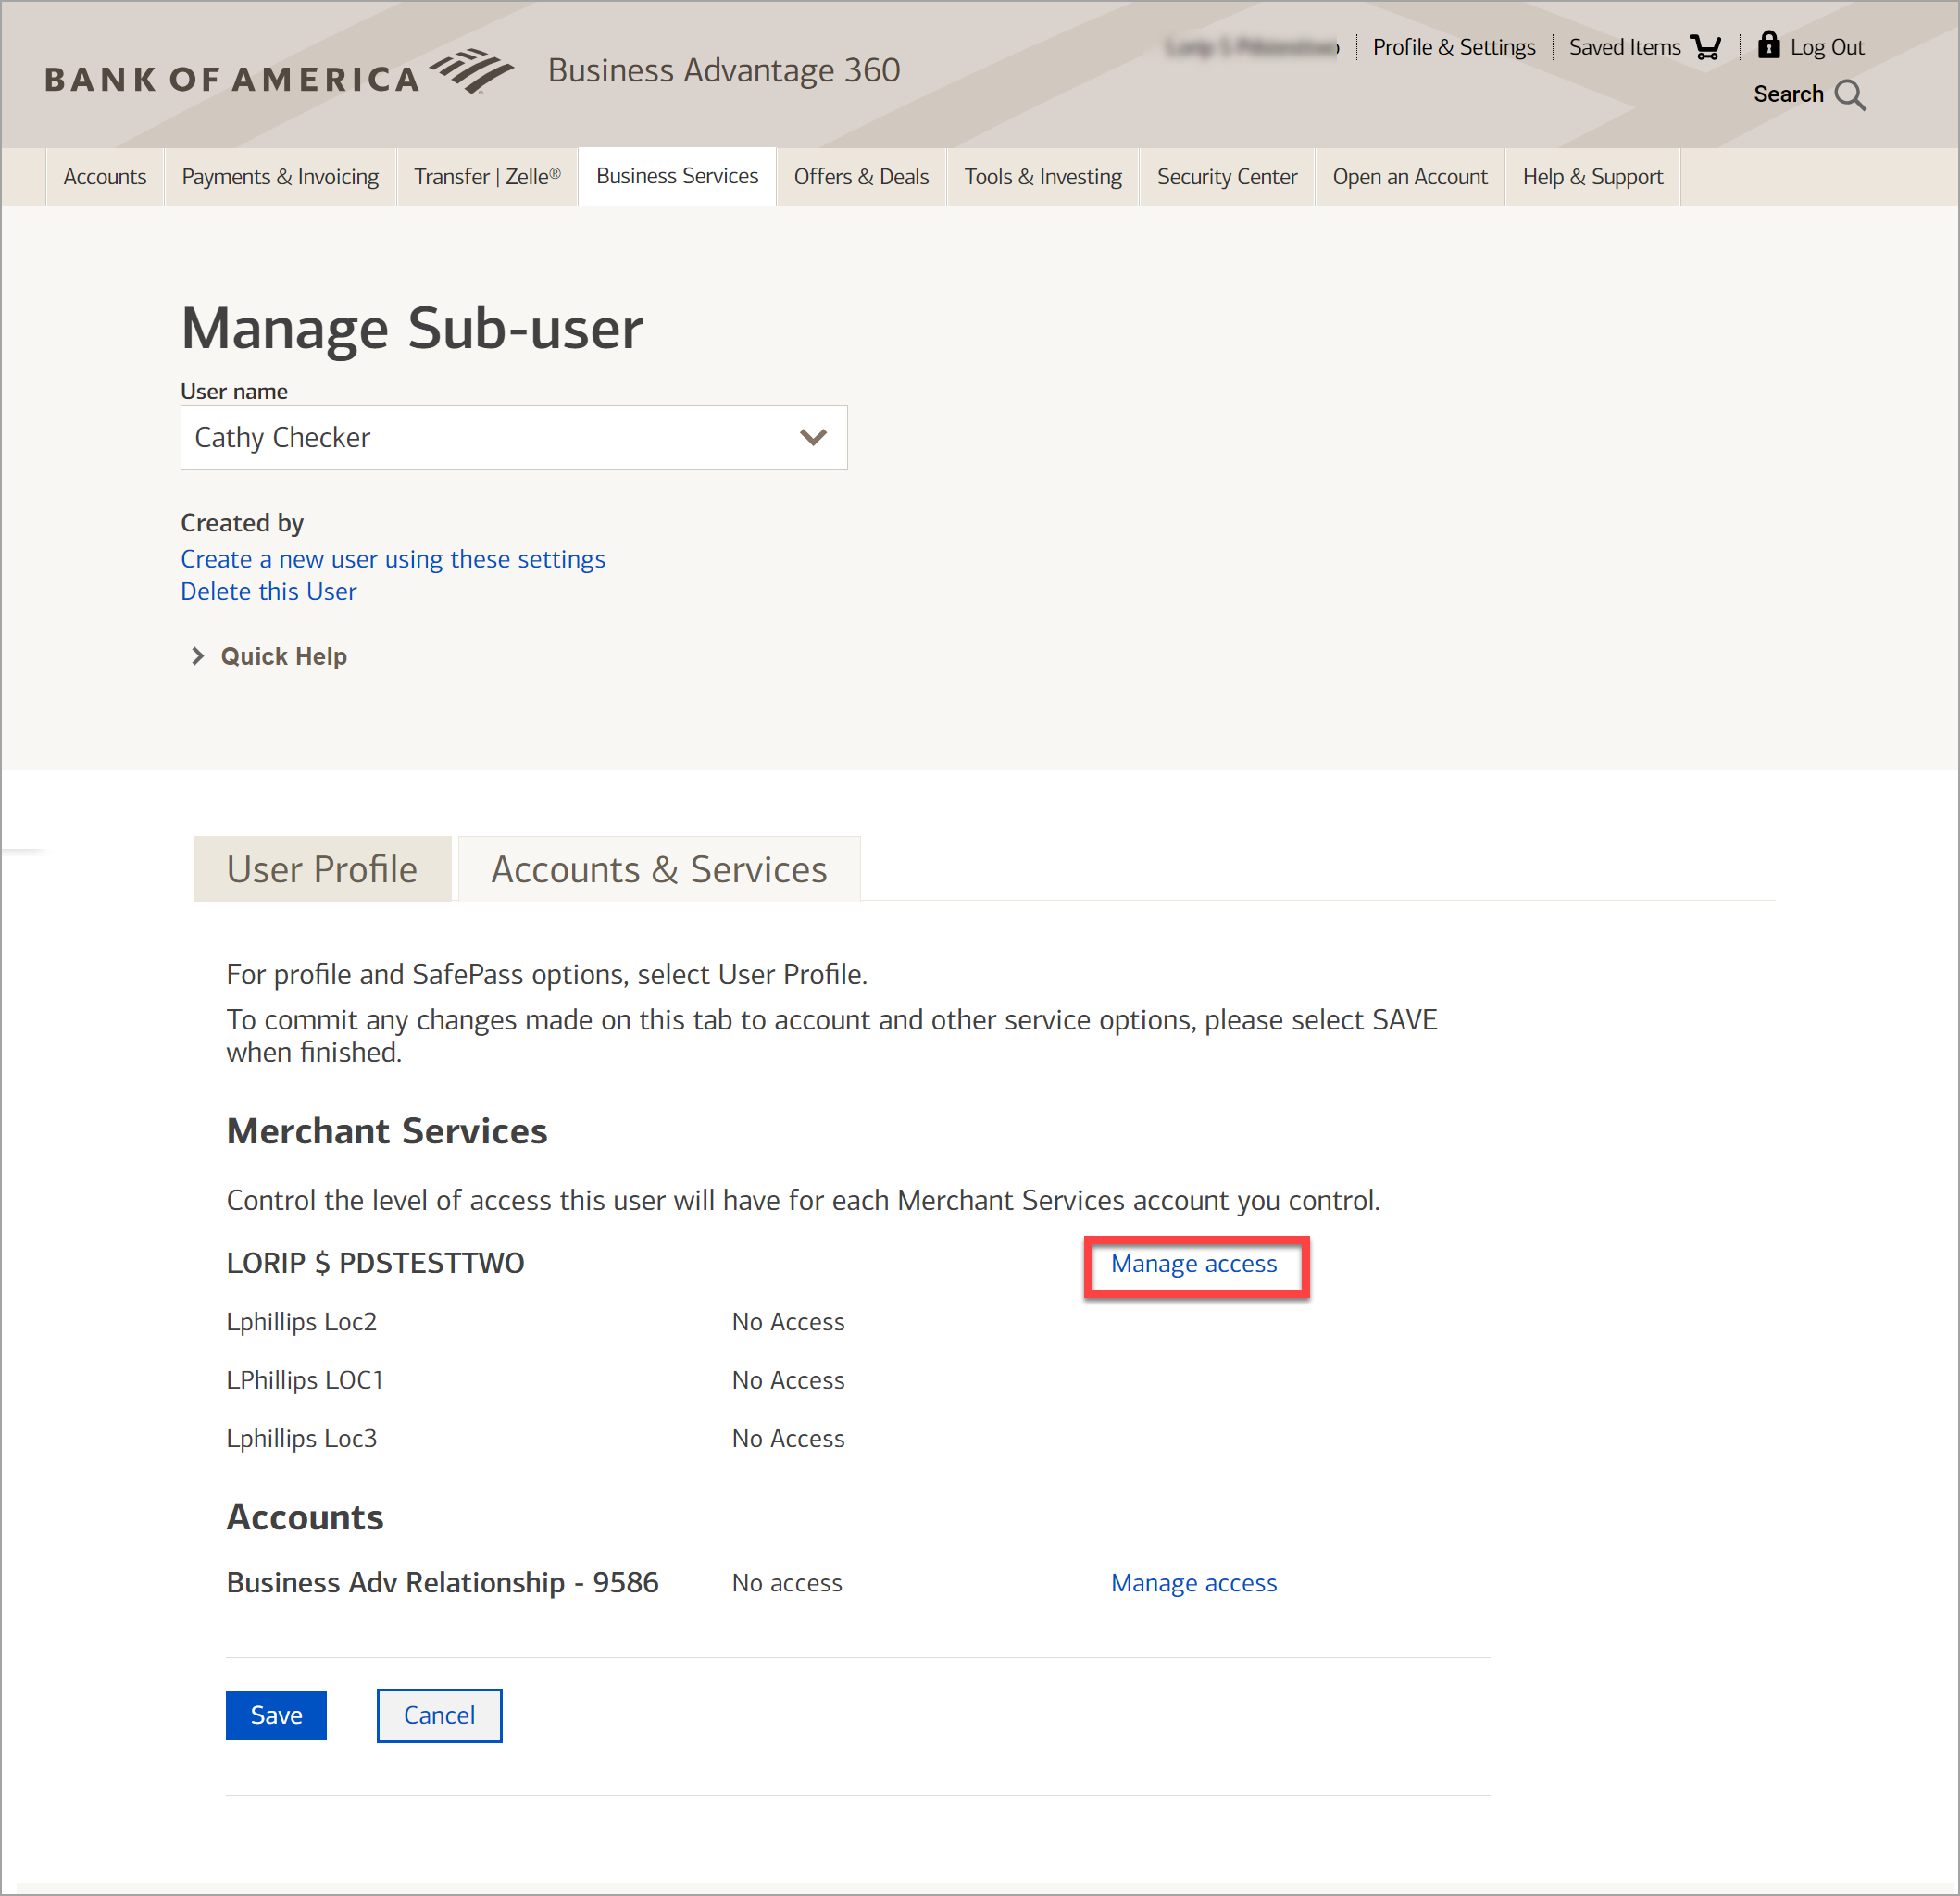 Select manage access link to manage subuser access